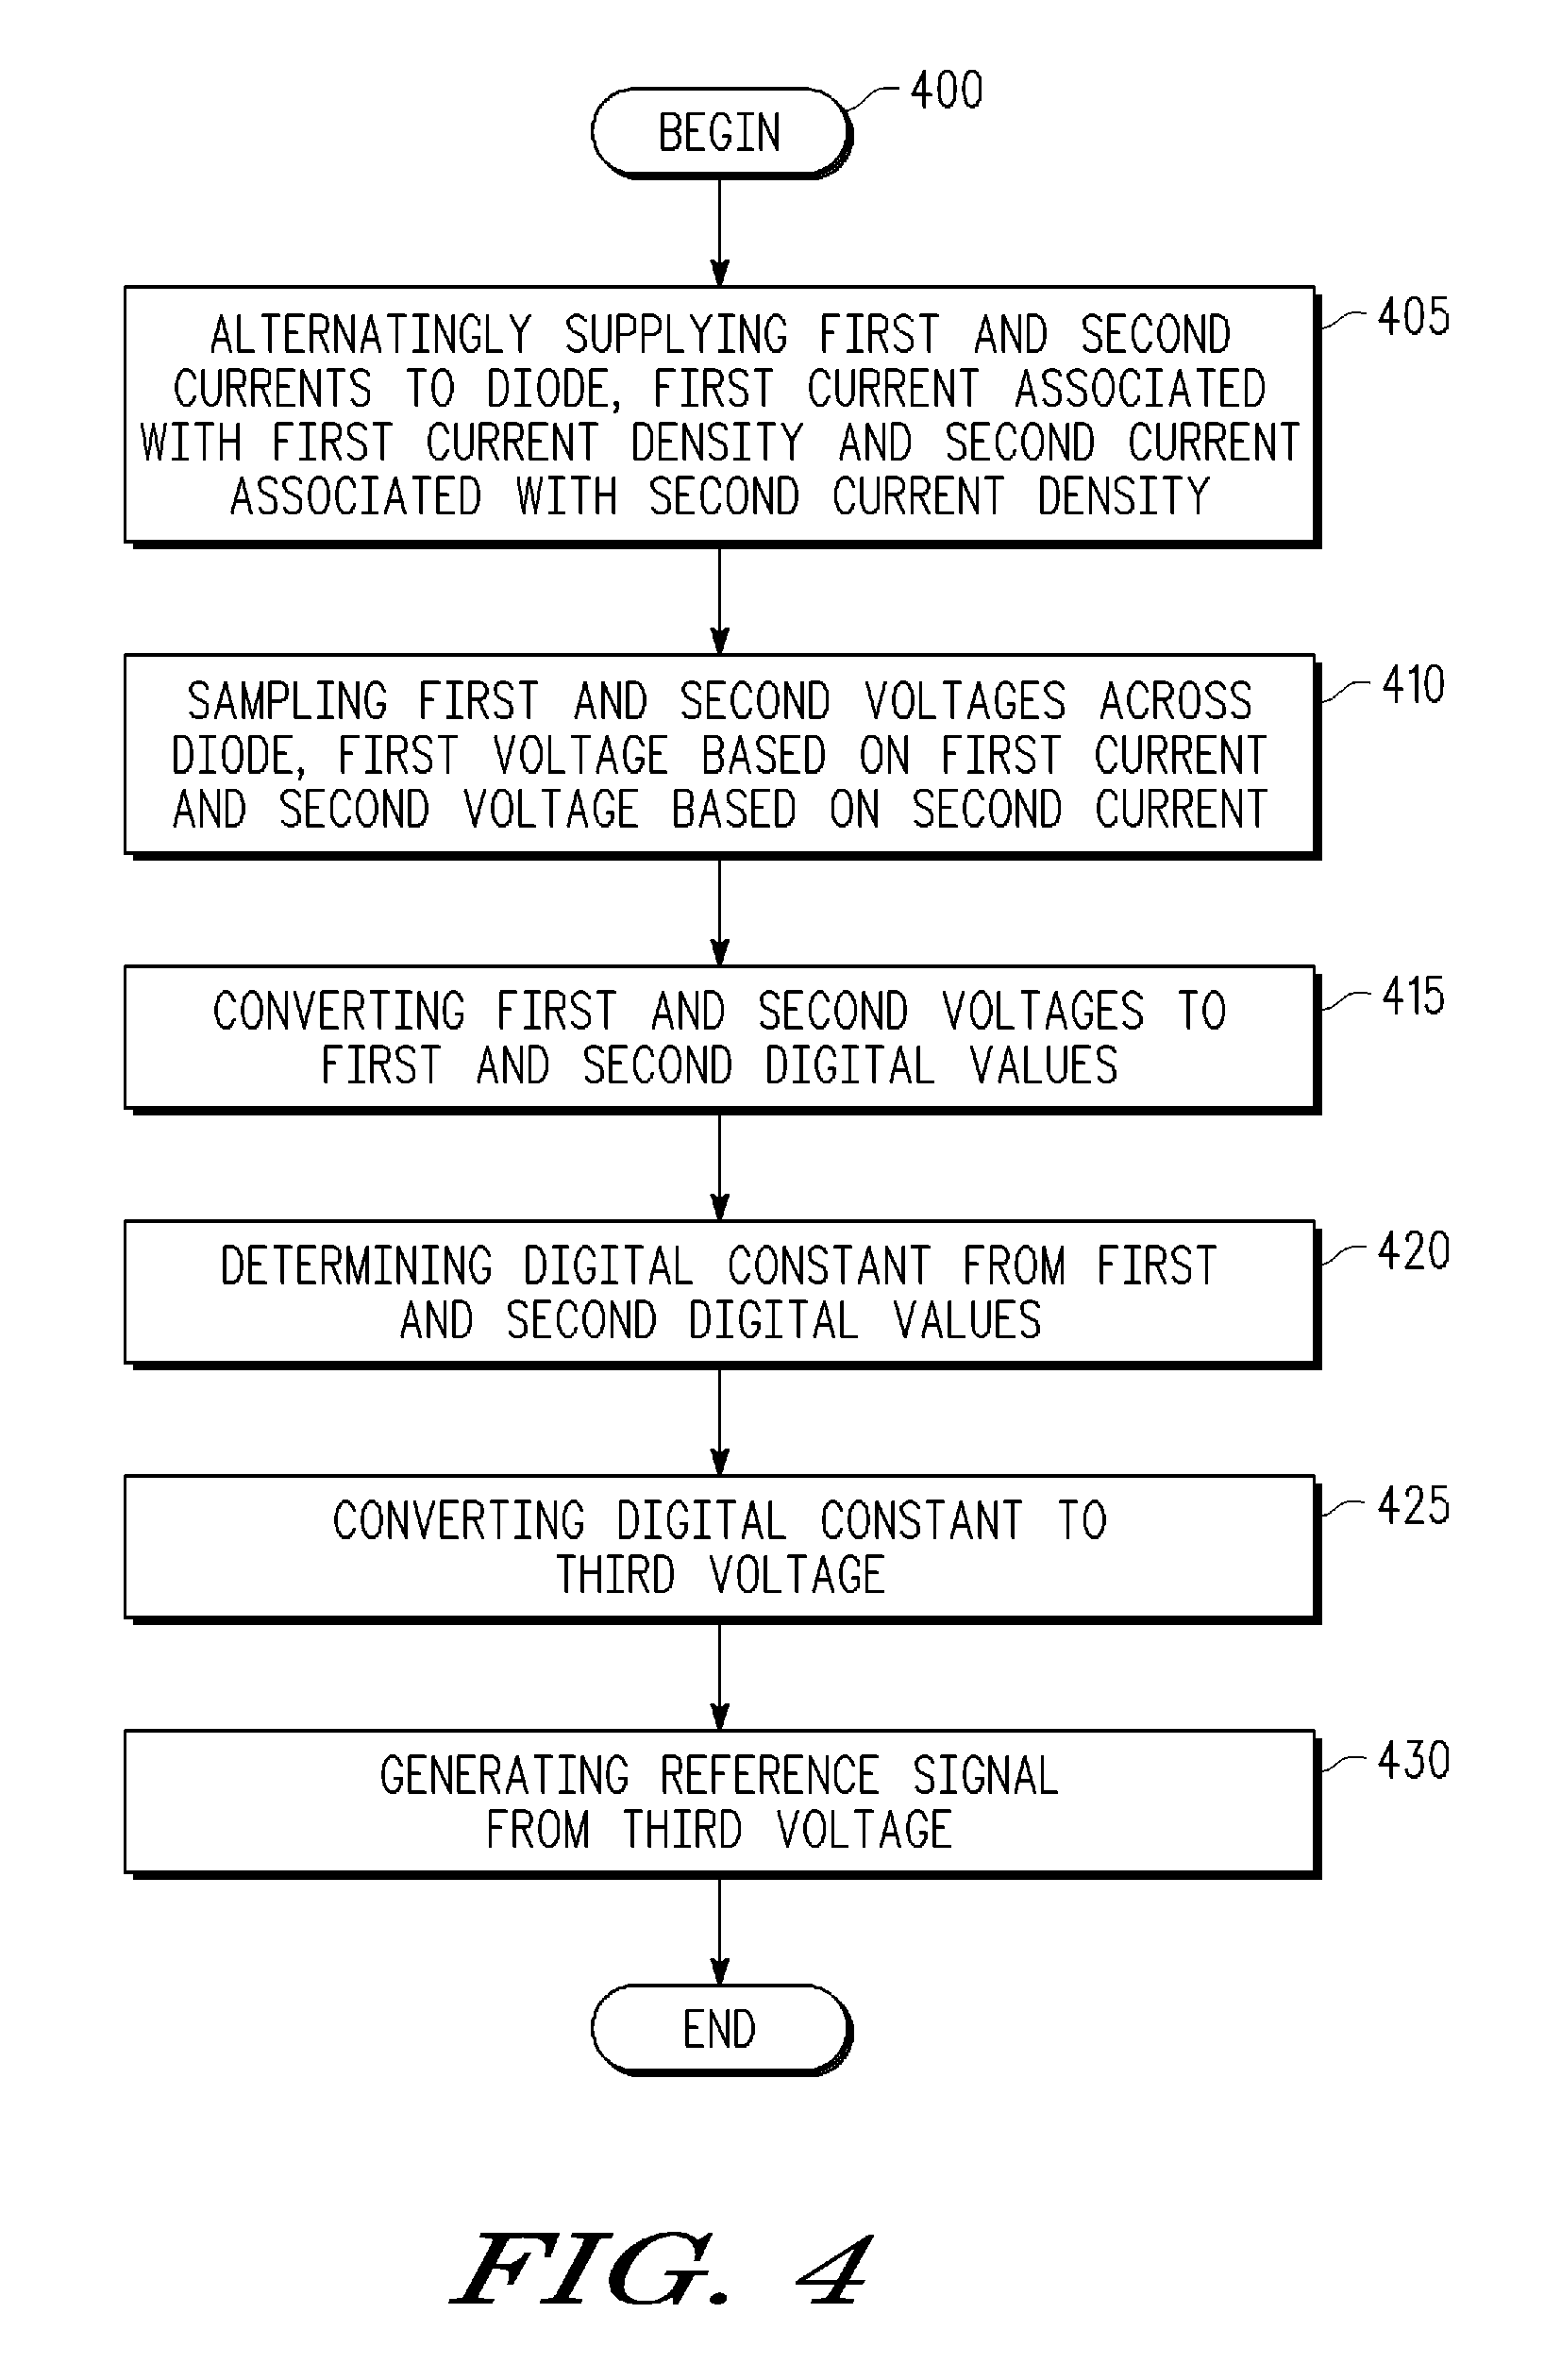 Digital bandgap reference and method for producing reference signal